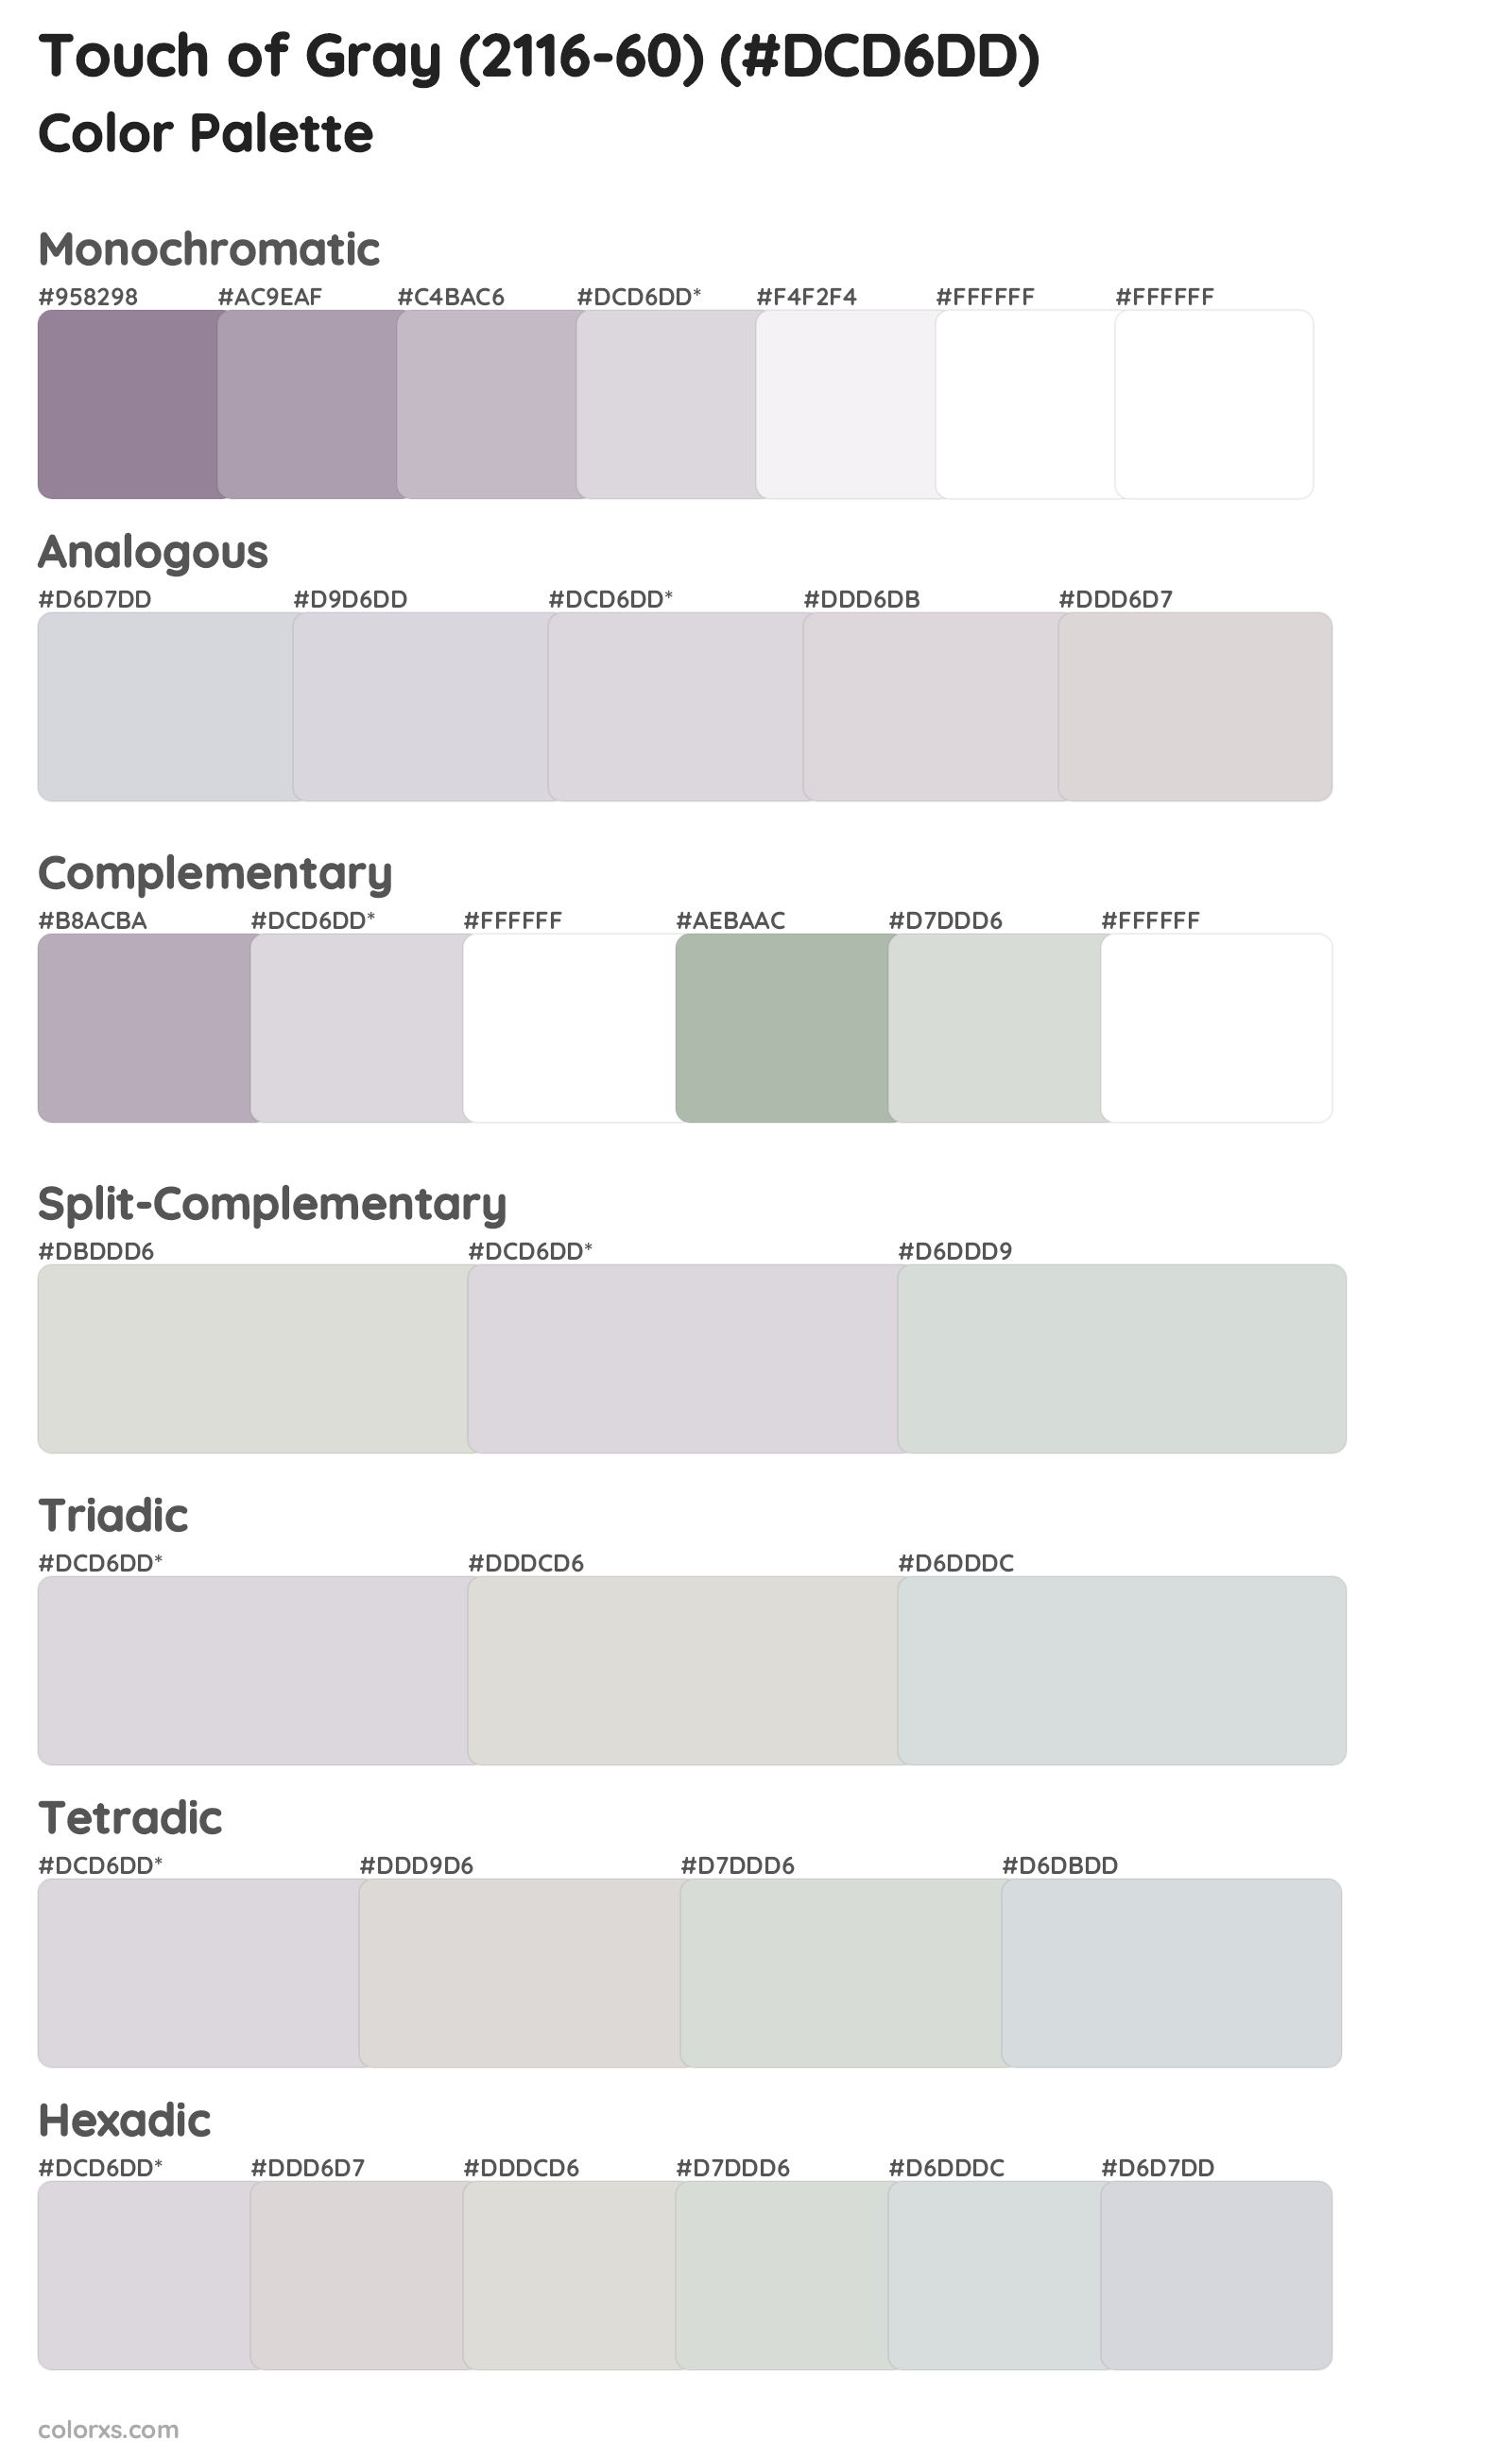 Touch of Gray (2116-60) Color Scheme Palettes